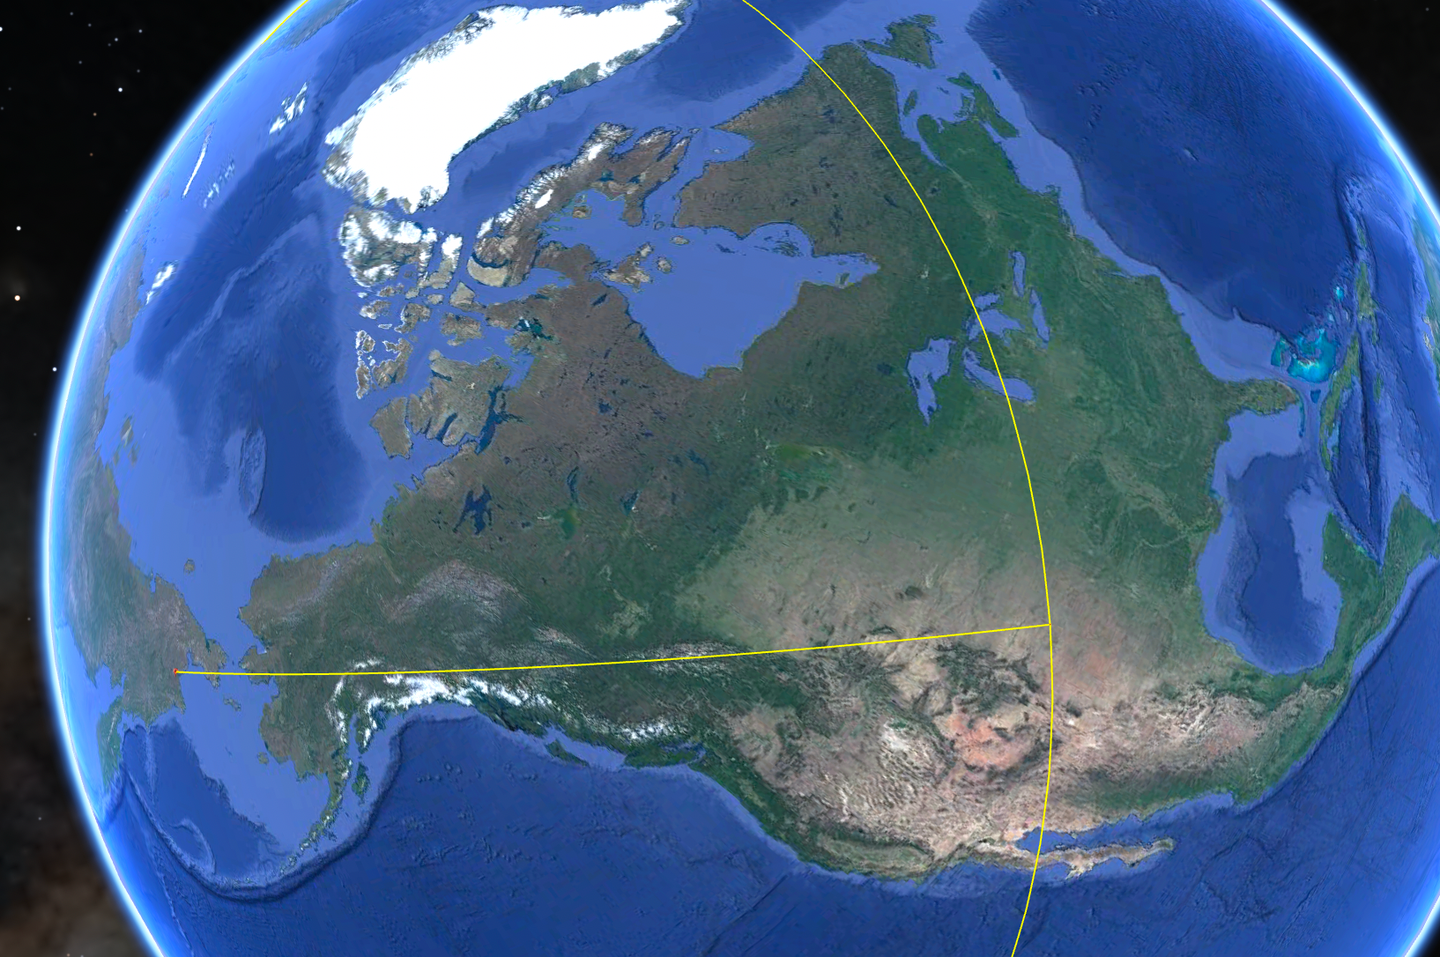 Meanwhile, a 3,700-mile-range Kh-BD launched from the forward deployment base at <a href="https://www.americansecurityproject.org/russian-arctic-military-bases/">Anadyr</a>, in the far north of Russia, could hold a consideravble portion of North America at risk. Tu-95MS bombers have been using Anadyr as a deployment base for many years; Tu-160s first landed there in 2018. <em>Google Earth</em>